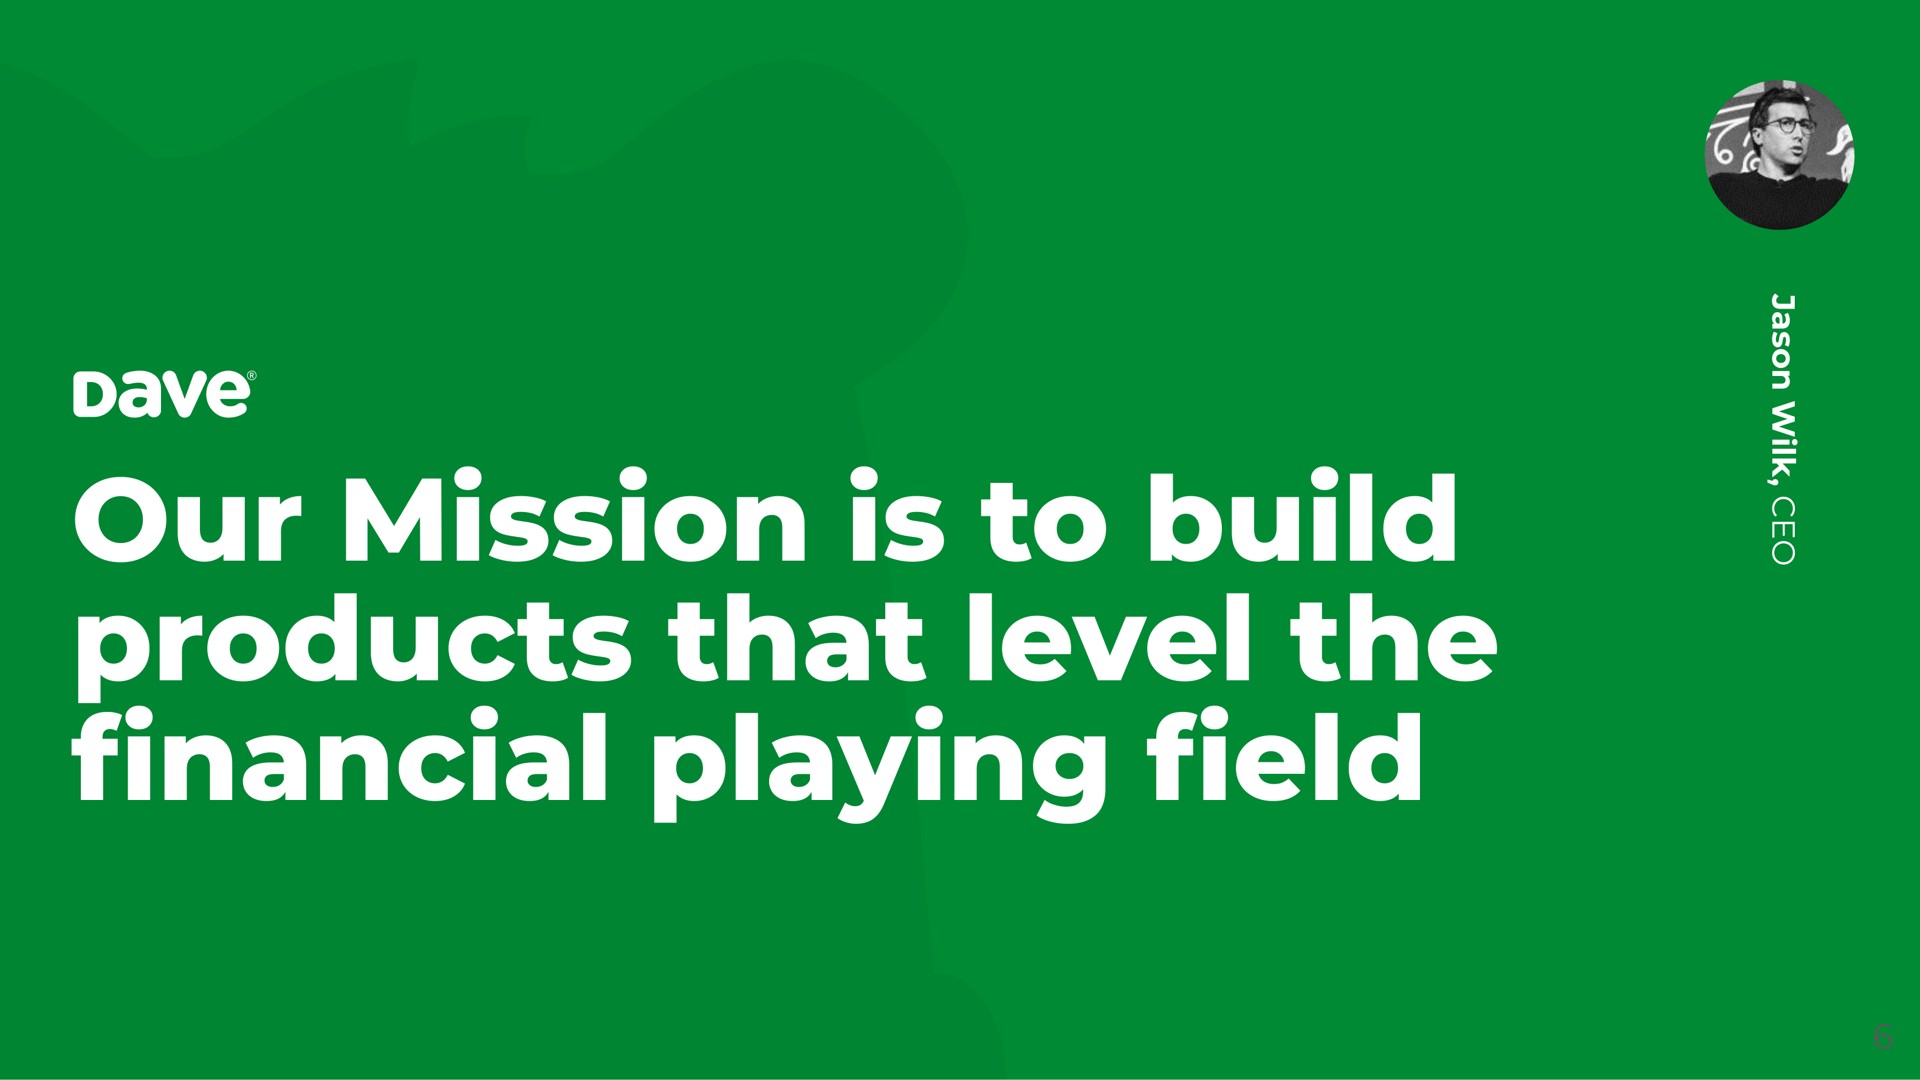 our mission is to build products that level the playing eld financial field | Dave